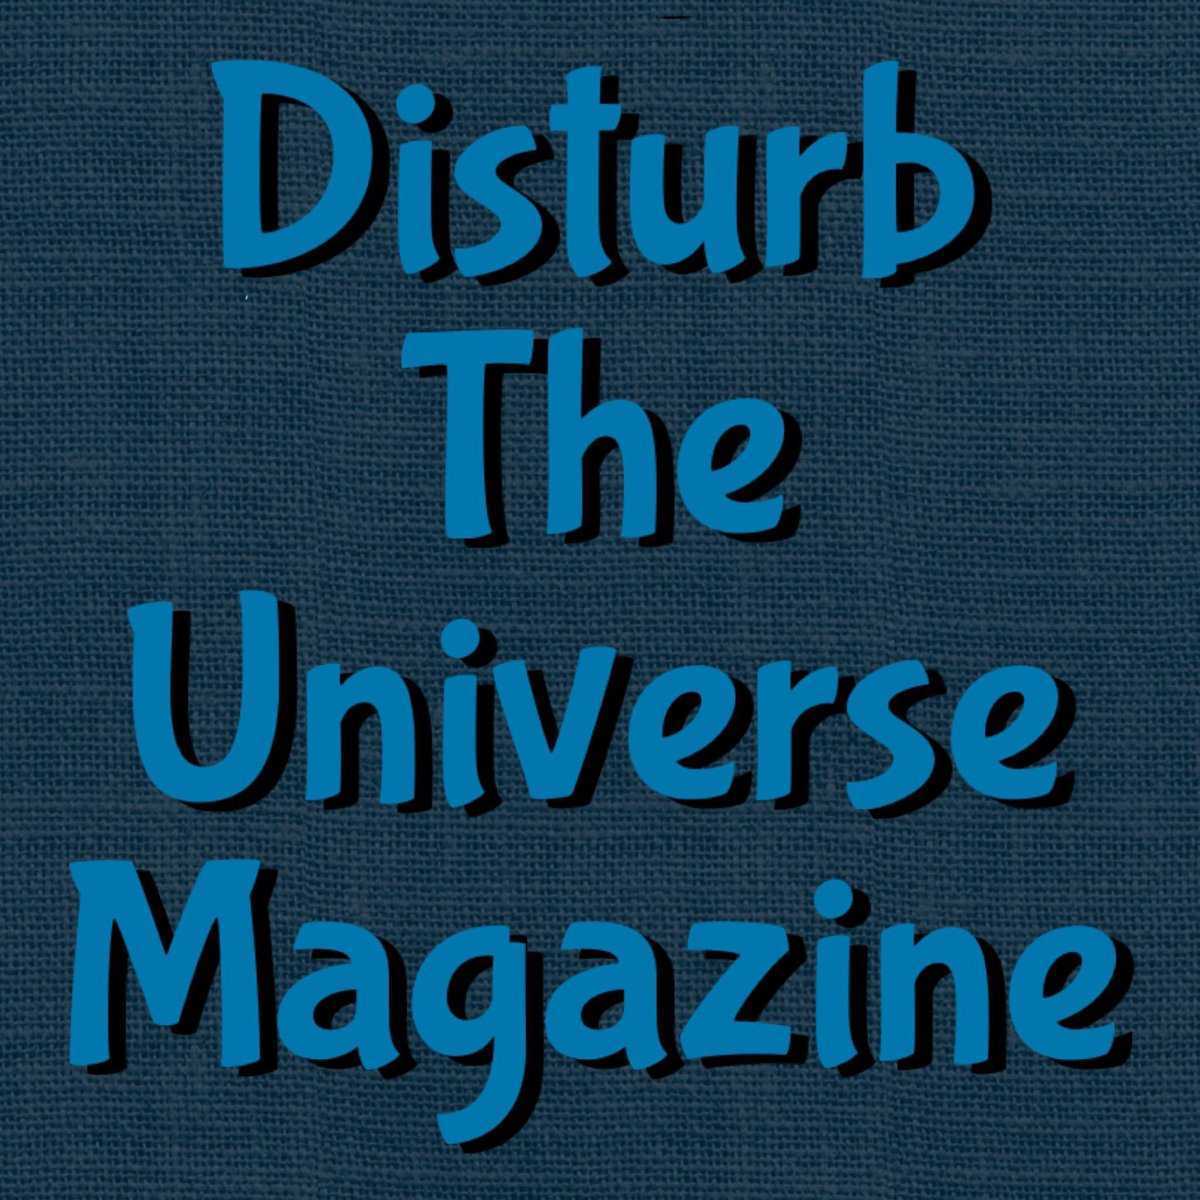 Up today at Disturb The Universe Magazine

Maybe I Can Go My Own Way By Ben Nardolilli

disturbtheuniversemagazine.com/2024/04/maybe-…

#publishedwriting #disturbtheuniversemagazine #published #writingcommunity #poetry #writing #publishedpoetry #poetrylovers #poetrytwitter #poetrycommunity